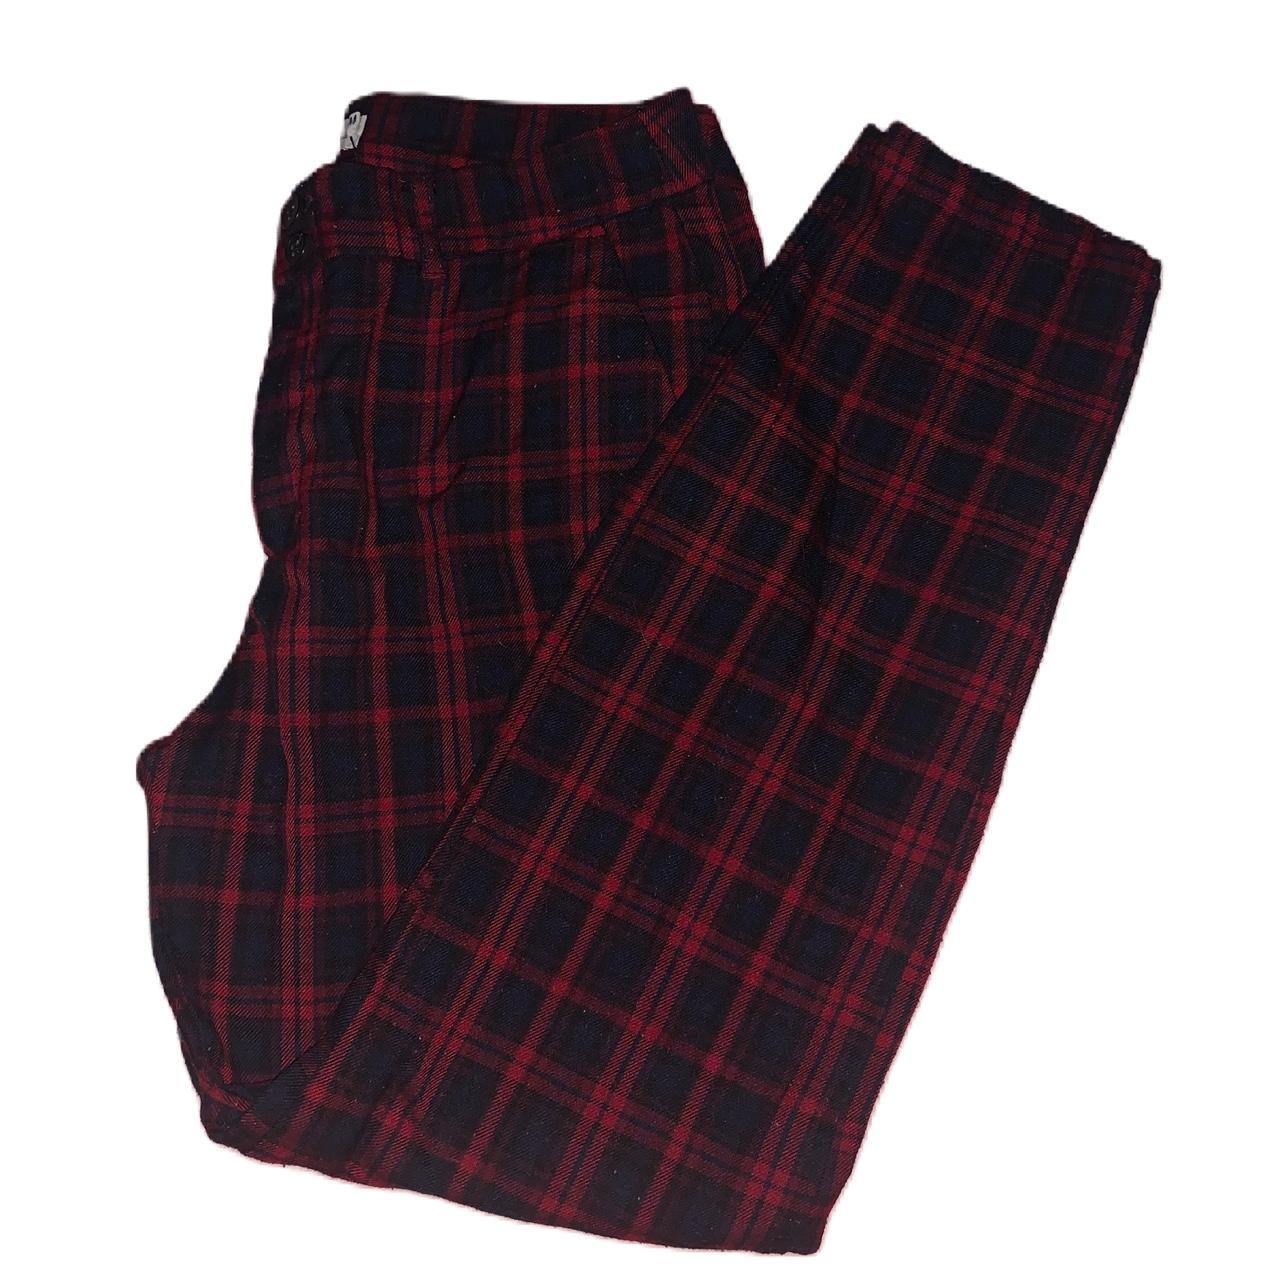 Amazing tartan/checked red and black trousers from... - Depop